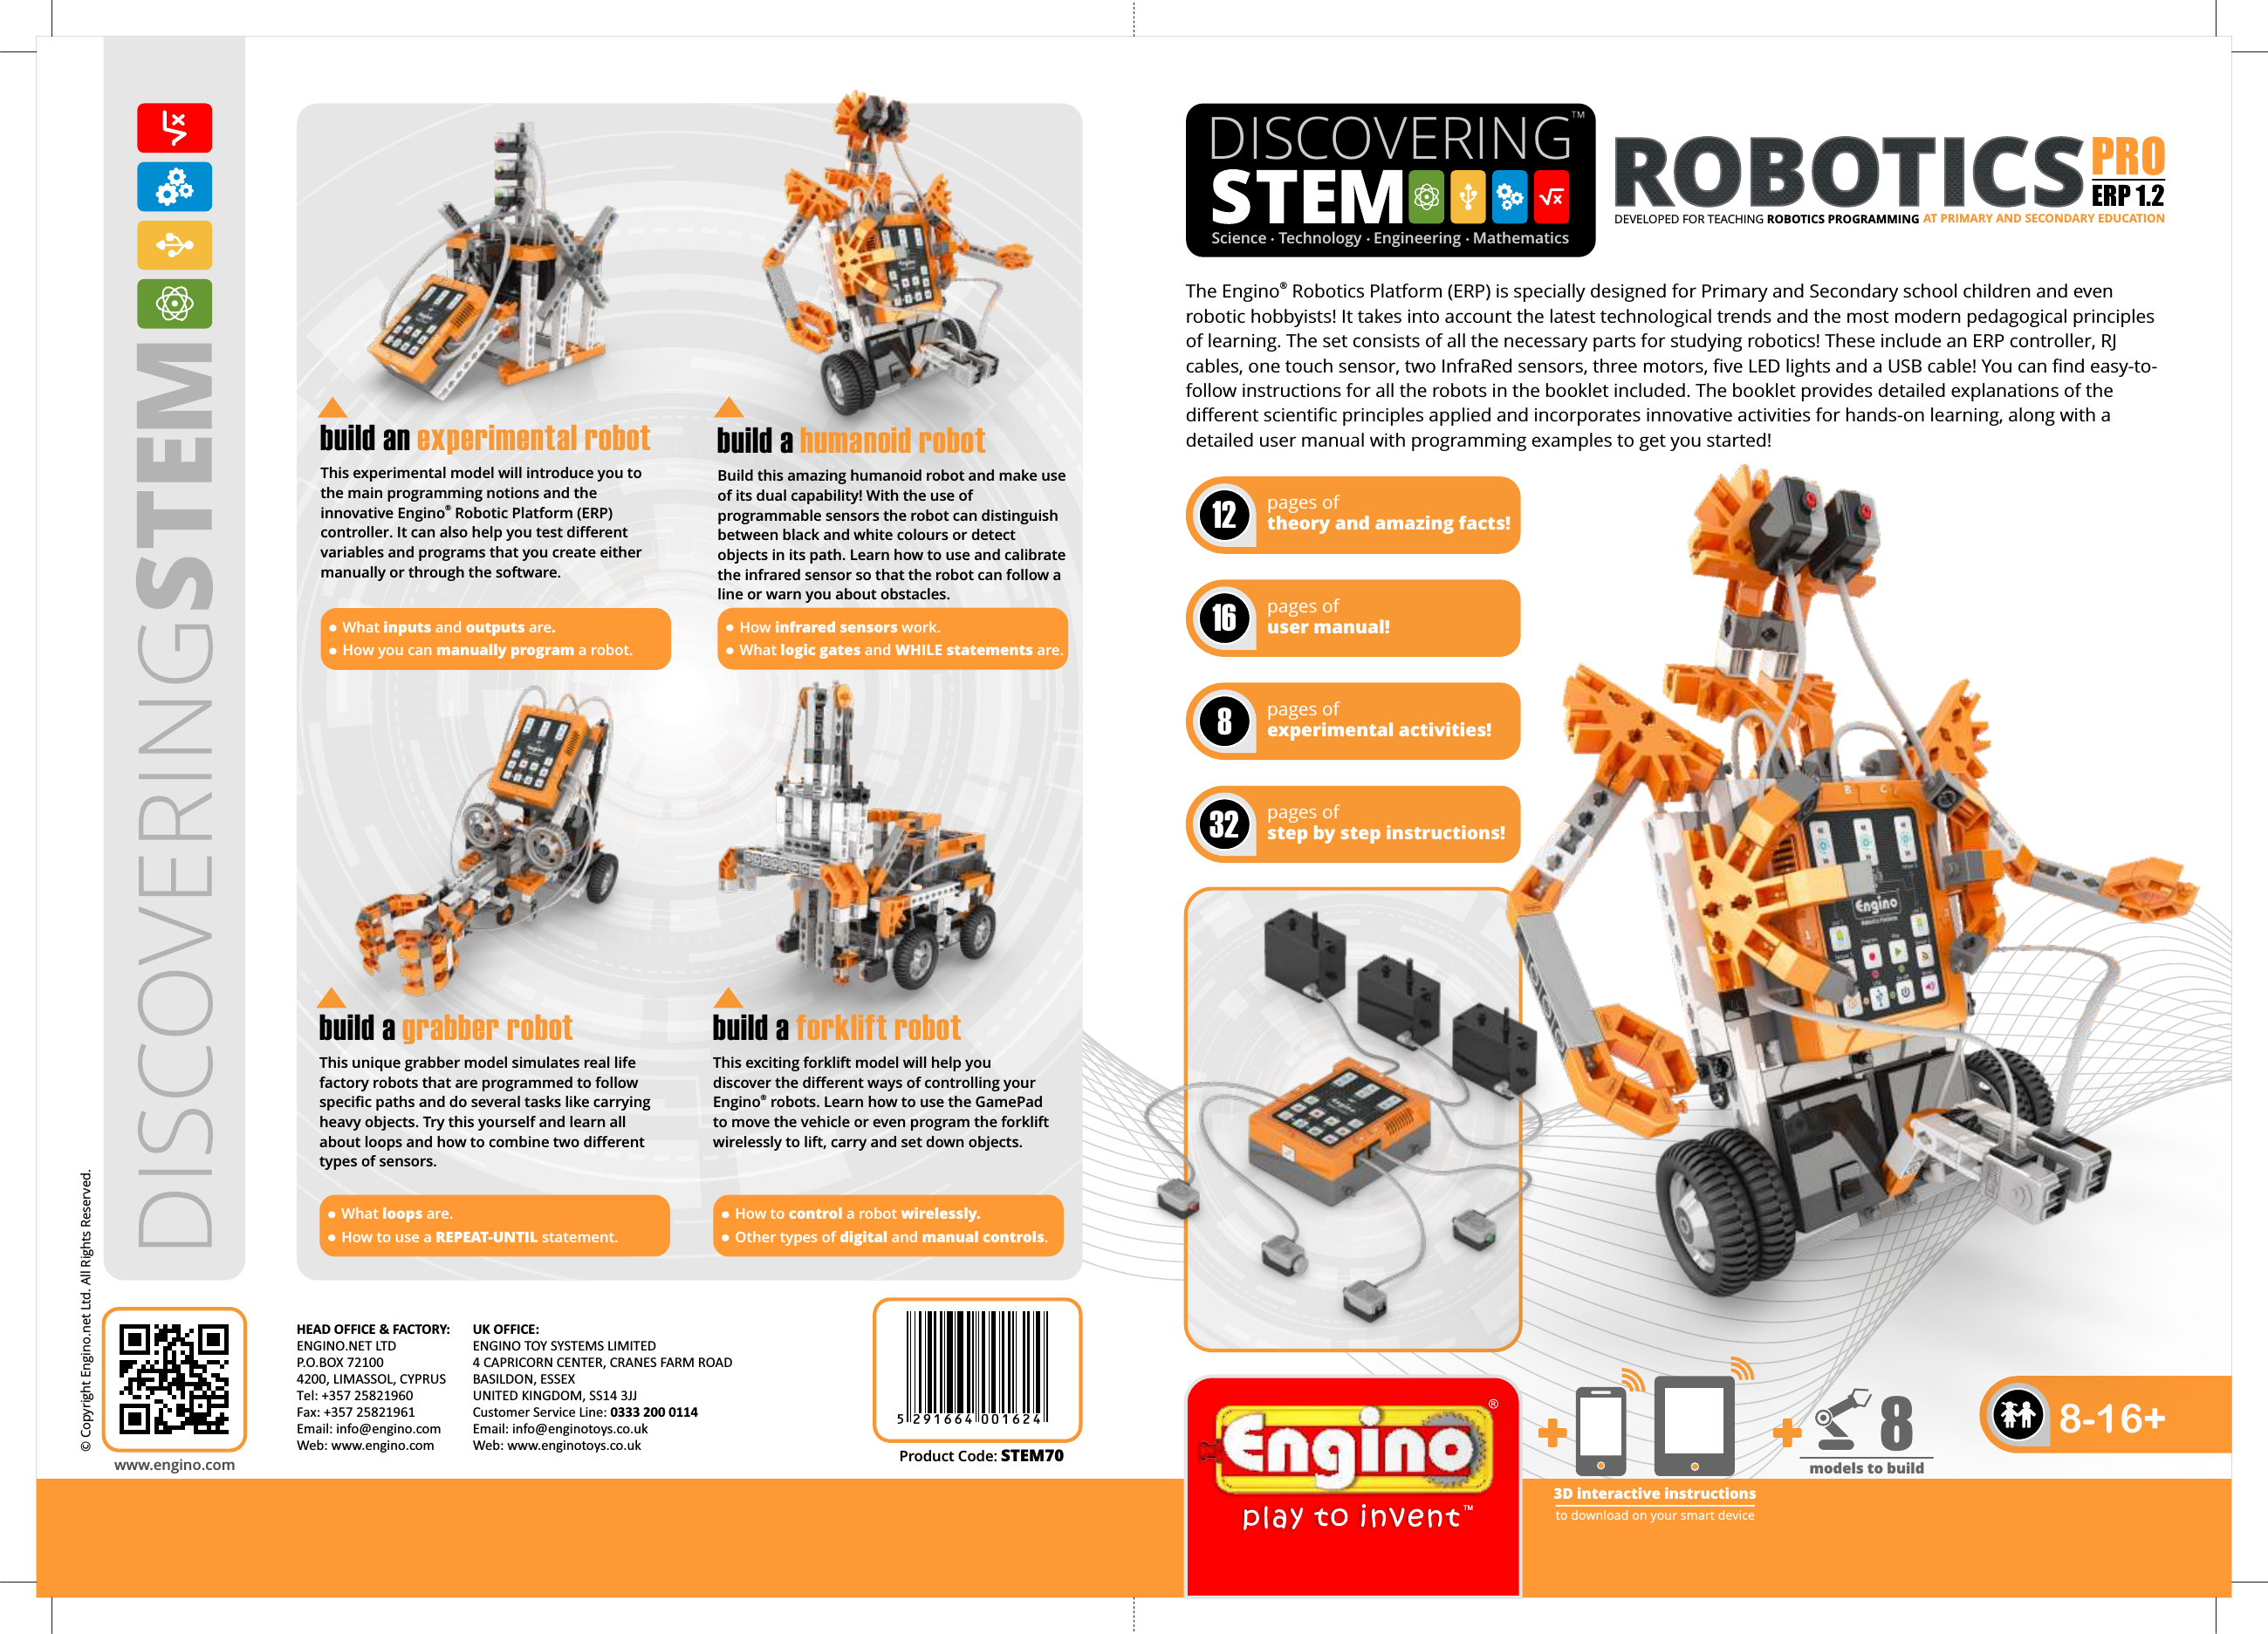 ®The Engino  Robotics Platform (ERP) is specially designed for Primary and Secondary school children and even robotic hobbyists! It takes into account the latest technological trends and the most modern pedagogical principles of learning. The set consists of all the necessary parts for studying robotics! These include an ERP controller, RJ cables, one touch sensor, two InfraRed sensors, three motors, five LED lights and a USB cable! You can find easy-to-follow instructions for all the robots in the booklet included. The booklet provides detailed explanations of the different scientific principles applied and incorporates innovative activities for hands-on learning, along with a detailed user manual with programming examples to get you started!DISCOVERING  Science   Technology   Engineering   Mathematicspages of theory and amazing facts!12pages of user manual!16pages of experimental activities!8pages of step by step instructions!32www.engino.com© Copyright Engino.net Ltd. All Rights Reserved.HEAD OFFICE &amp; FACTORY: ENGINO.NET LTDP.O.BOX 721004200, LIMASSOL, CYPRUS Tel: +357 25821960Fax: +357 25821961Email: info@engino.comWeb: www.engino.comUK OFFICE: ENGINO TOY SYSTEMS LIMITED4 CAPRICORN CENTER, CRANES FARM ROADBASILDON, ESSEX UNITED KINGDOM, SS14 3JJ Customer Service Line: 0333 200 0114Email: info@enginotoys.co.ukWeb: www.enginotoys.co.uk8-16+TMProduct Code: STEM70DEVELOPED FOR TEACHING ROBOTICS PROGRAMMING ERP 1.2PRO AT PRIMARY AND SECONDARY EDUCATION5 2 9 1 6 6 4 0 0 1 6 2 43D interactive instructionsto download on your smart devicemodels to build8 This unique grabber model simulates real life factory robots that are programmed to follow specific paths and do several tasks like carrying heavy objects. Try this yourself and learn all about loops and how to combine two different types of sensors.build a grabber robotThis exciting forklift model will help you discover the different ways of controlling your ®Engino  robots. Learn how to use the GamePad to move the vehicle or even program the forklift wirelessly to lift, carry and set down objects.build a forklift robotWhat loops are.How to use a REPEAT-UNTIL statement.How to control a robot wirelessly.Other types of digital and manual controls.This experimental model will introduce you to the main programming notions and the ®innovative Engino  Robotic Platform (ERP) controller. It can also help you test different variables and programs that you create either manually or through the software. build   an experimental robotWhat inputs and outputs are.How you can manually program a robot. Build this amazing humanoid robot and make use of its dual capability! With the use of programmable sensors the robot can distinguish between black and white colours or detect objects in its path. Learn how to use and calibrate the infrared sensor so that the robot can follow a line or warn you about obstacles. build a humanoid robotHow infrared sensors work.What logic gates and WHILE statements are.